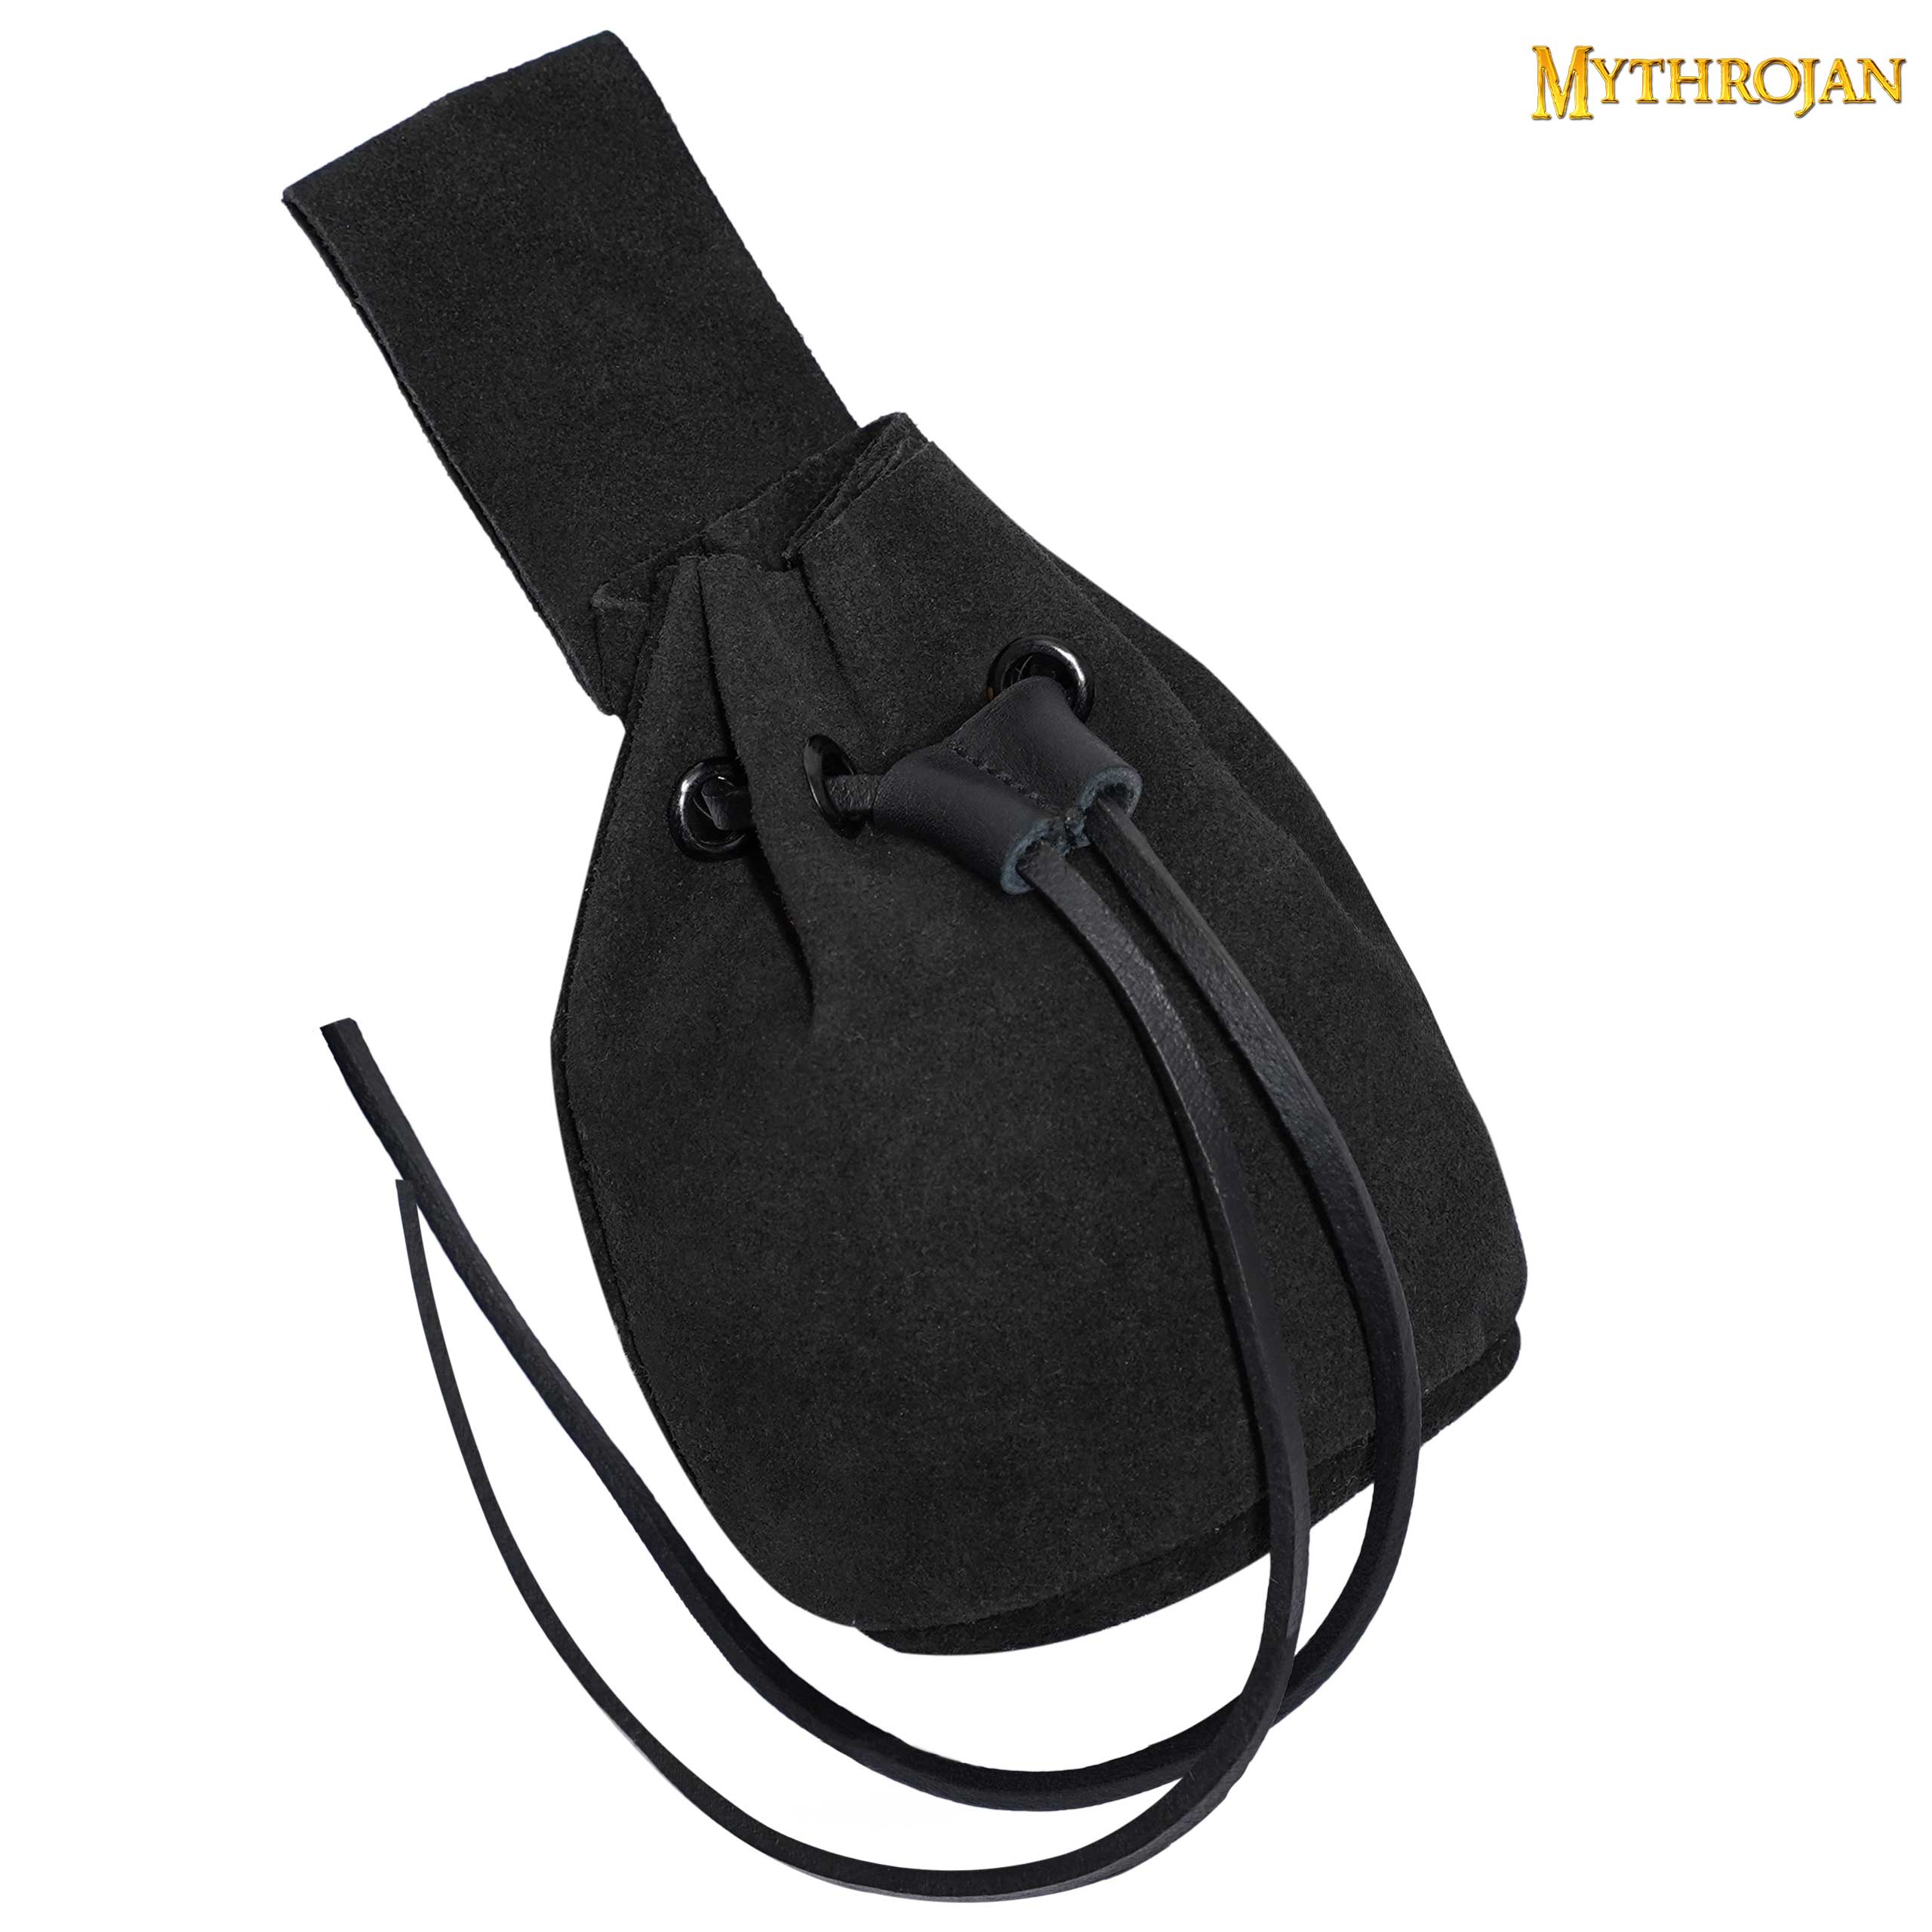 Costume suede leather pouch with drawstring